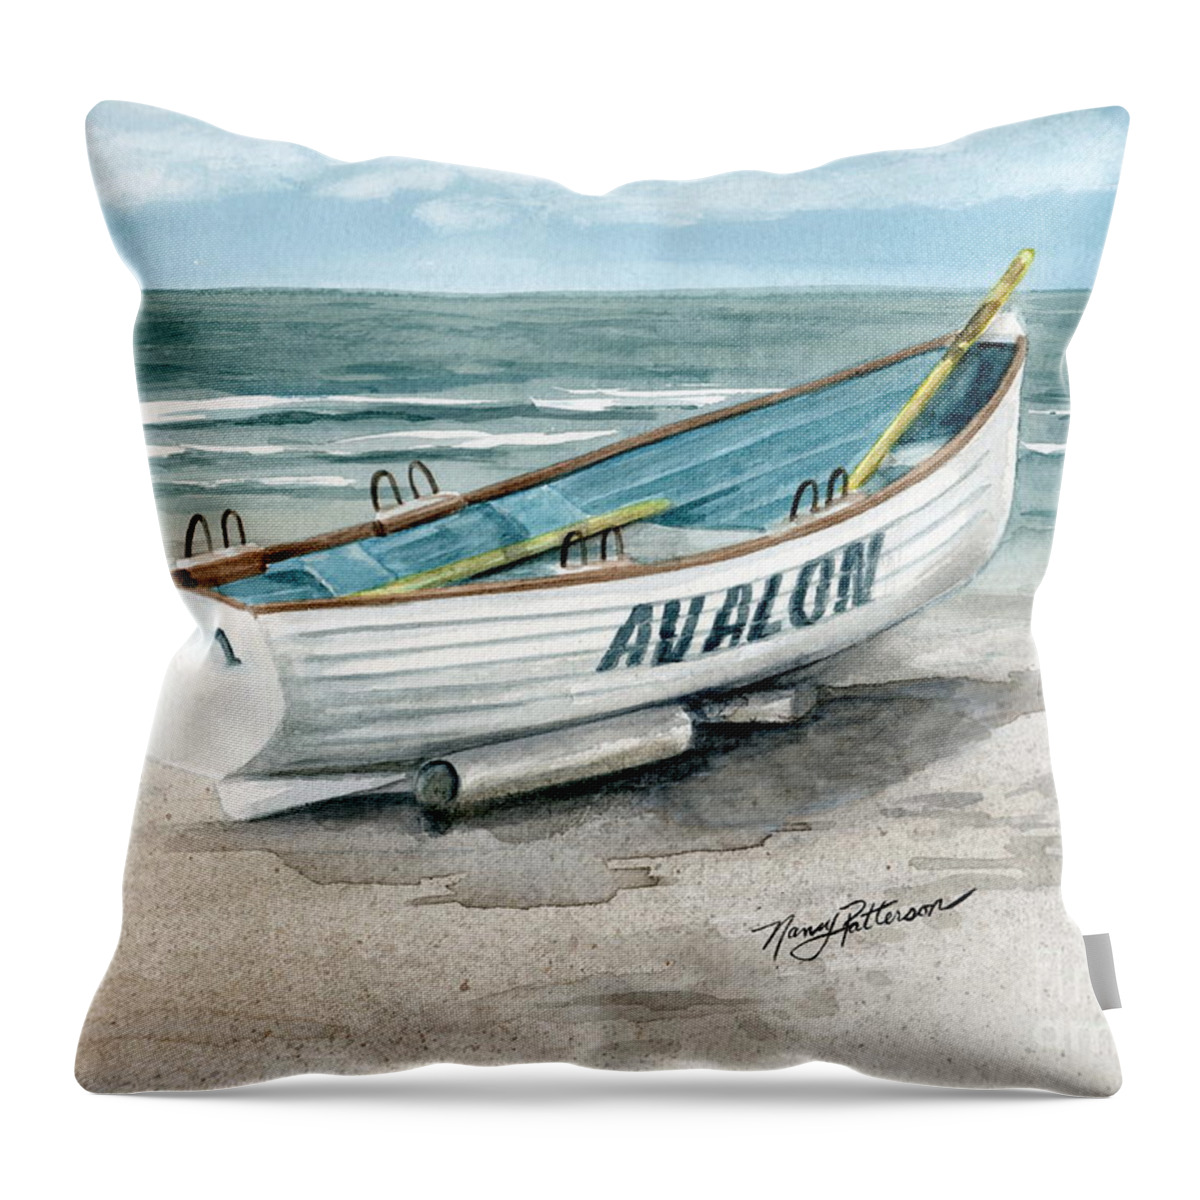 Lifeguard Boat Throw Pillow featuring the painting Avalon Lifeguard Boat by Nancy Patterson